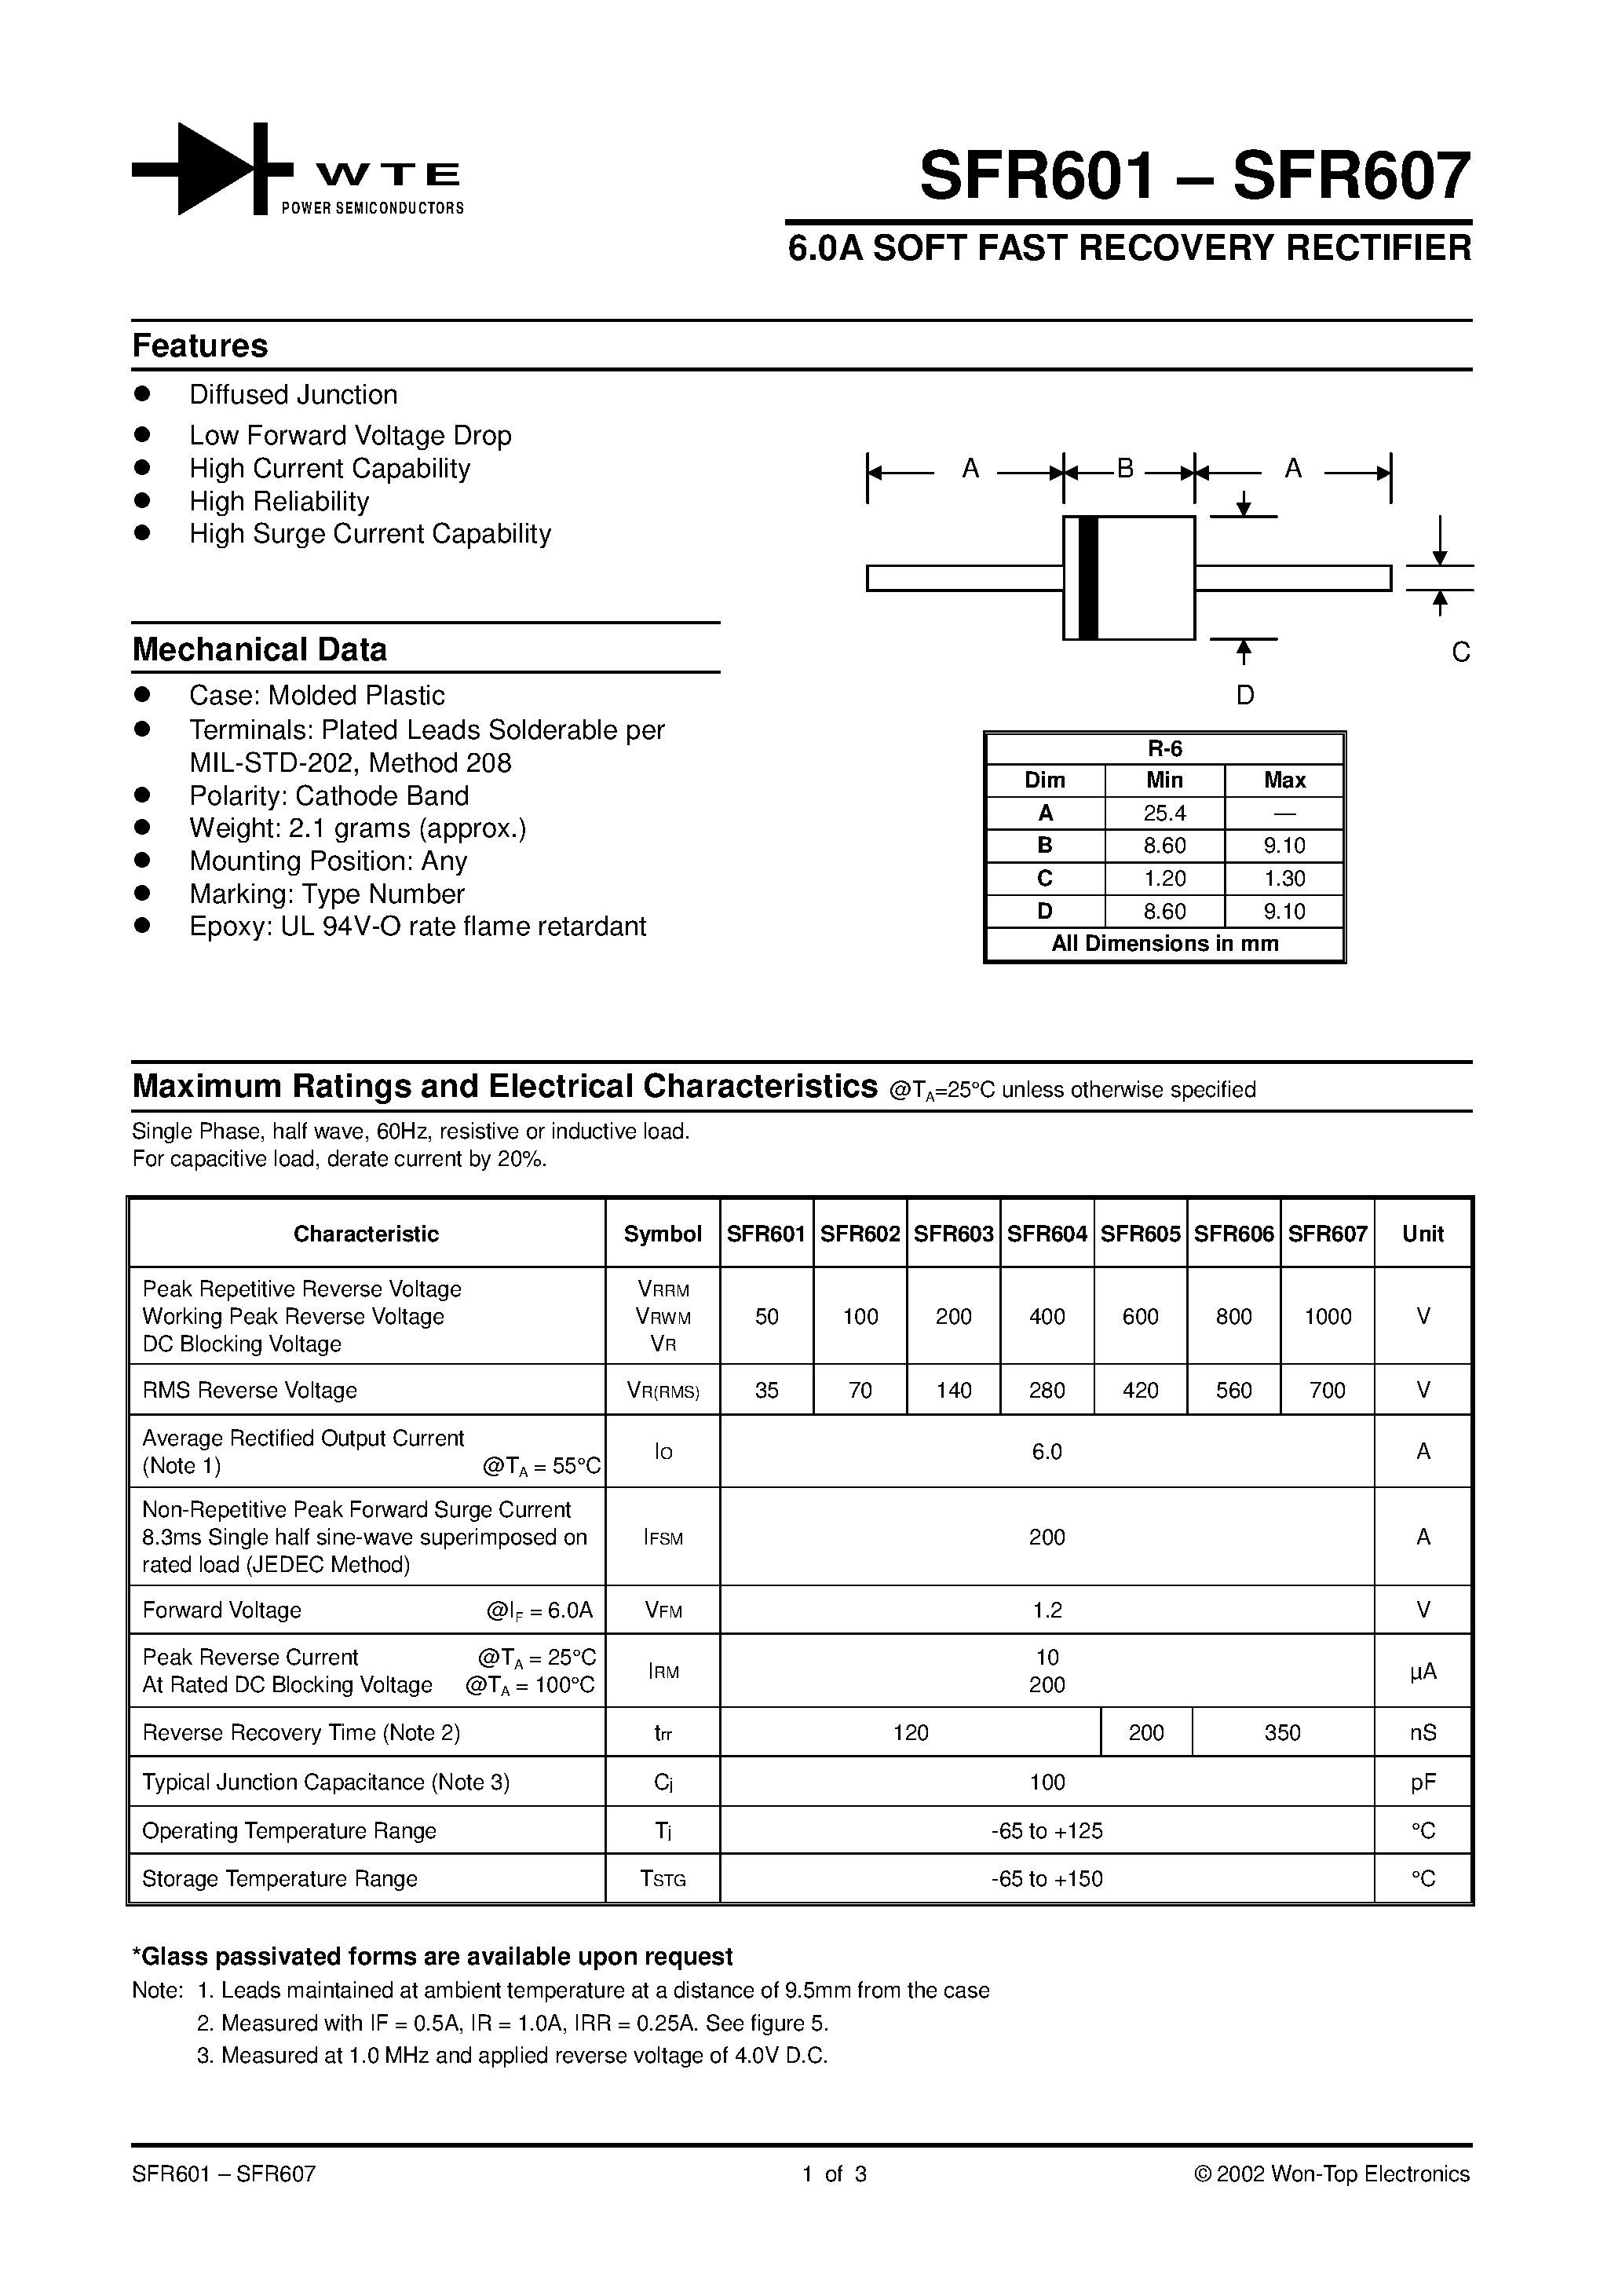 Datasheet SFR606 - 6.0A SOFT FAST RECOVERY RECTIFIER page 1